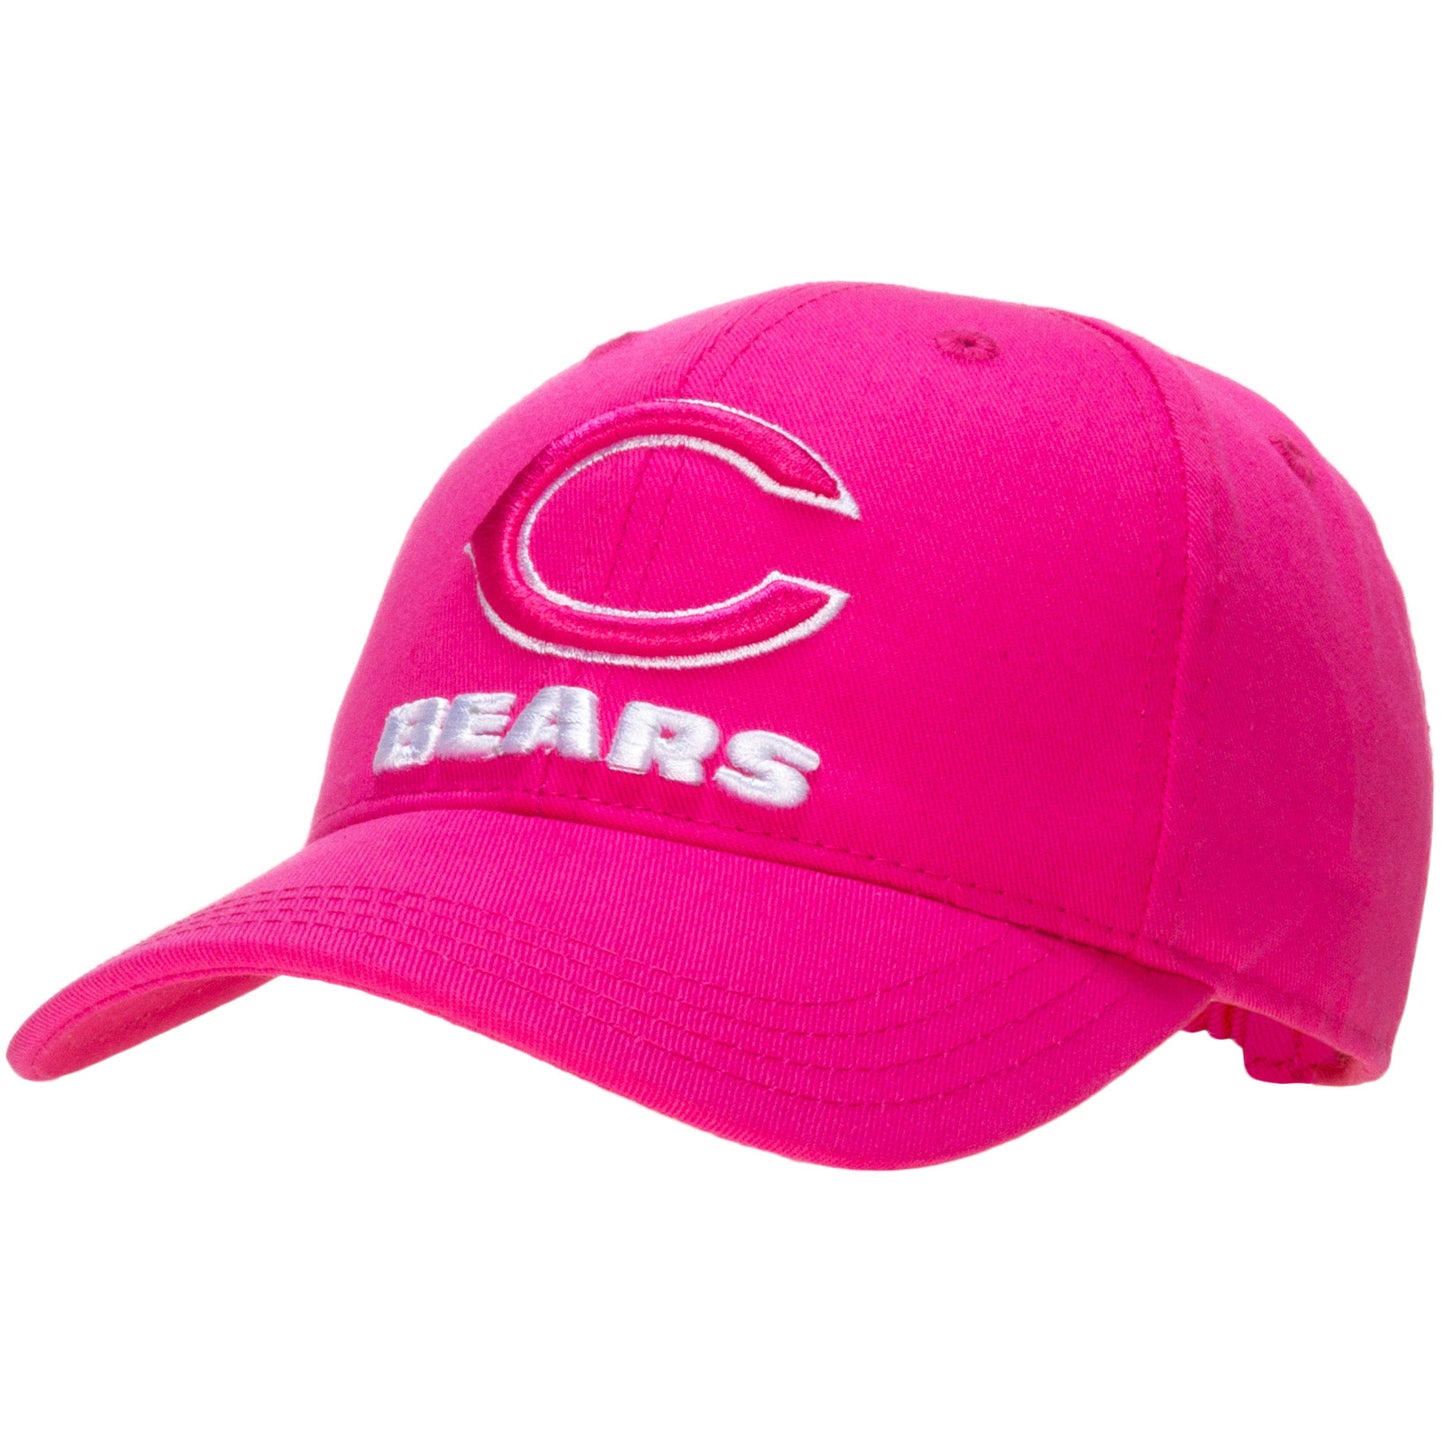 Chicago Bears Toddler Girls' Pink "C" and Text Logos Adjustable Hat